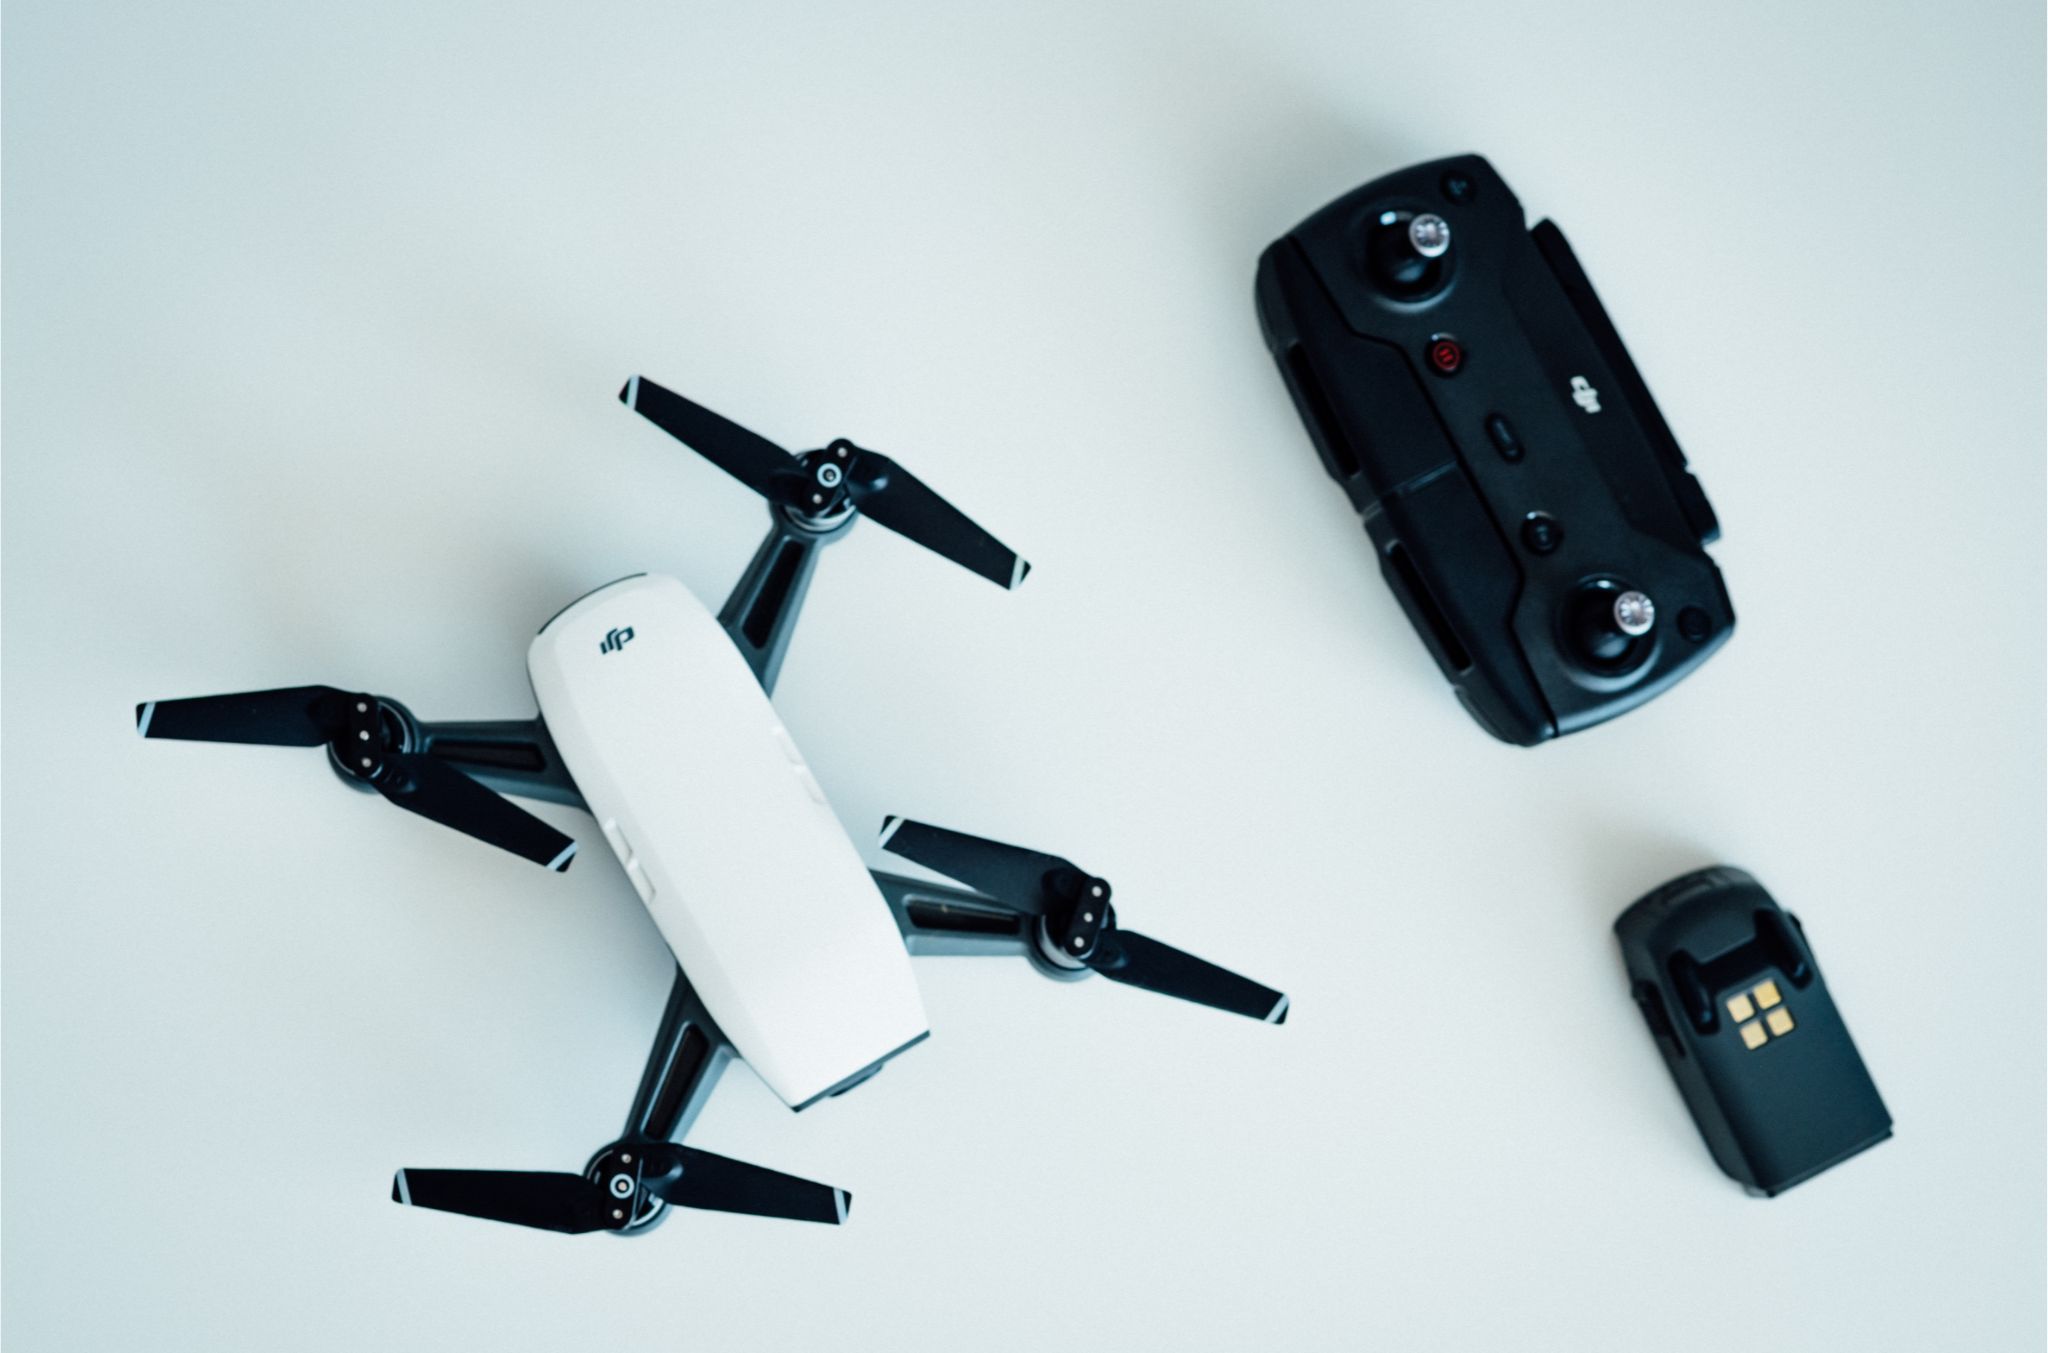 Drone and its remote control